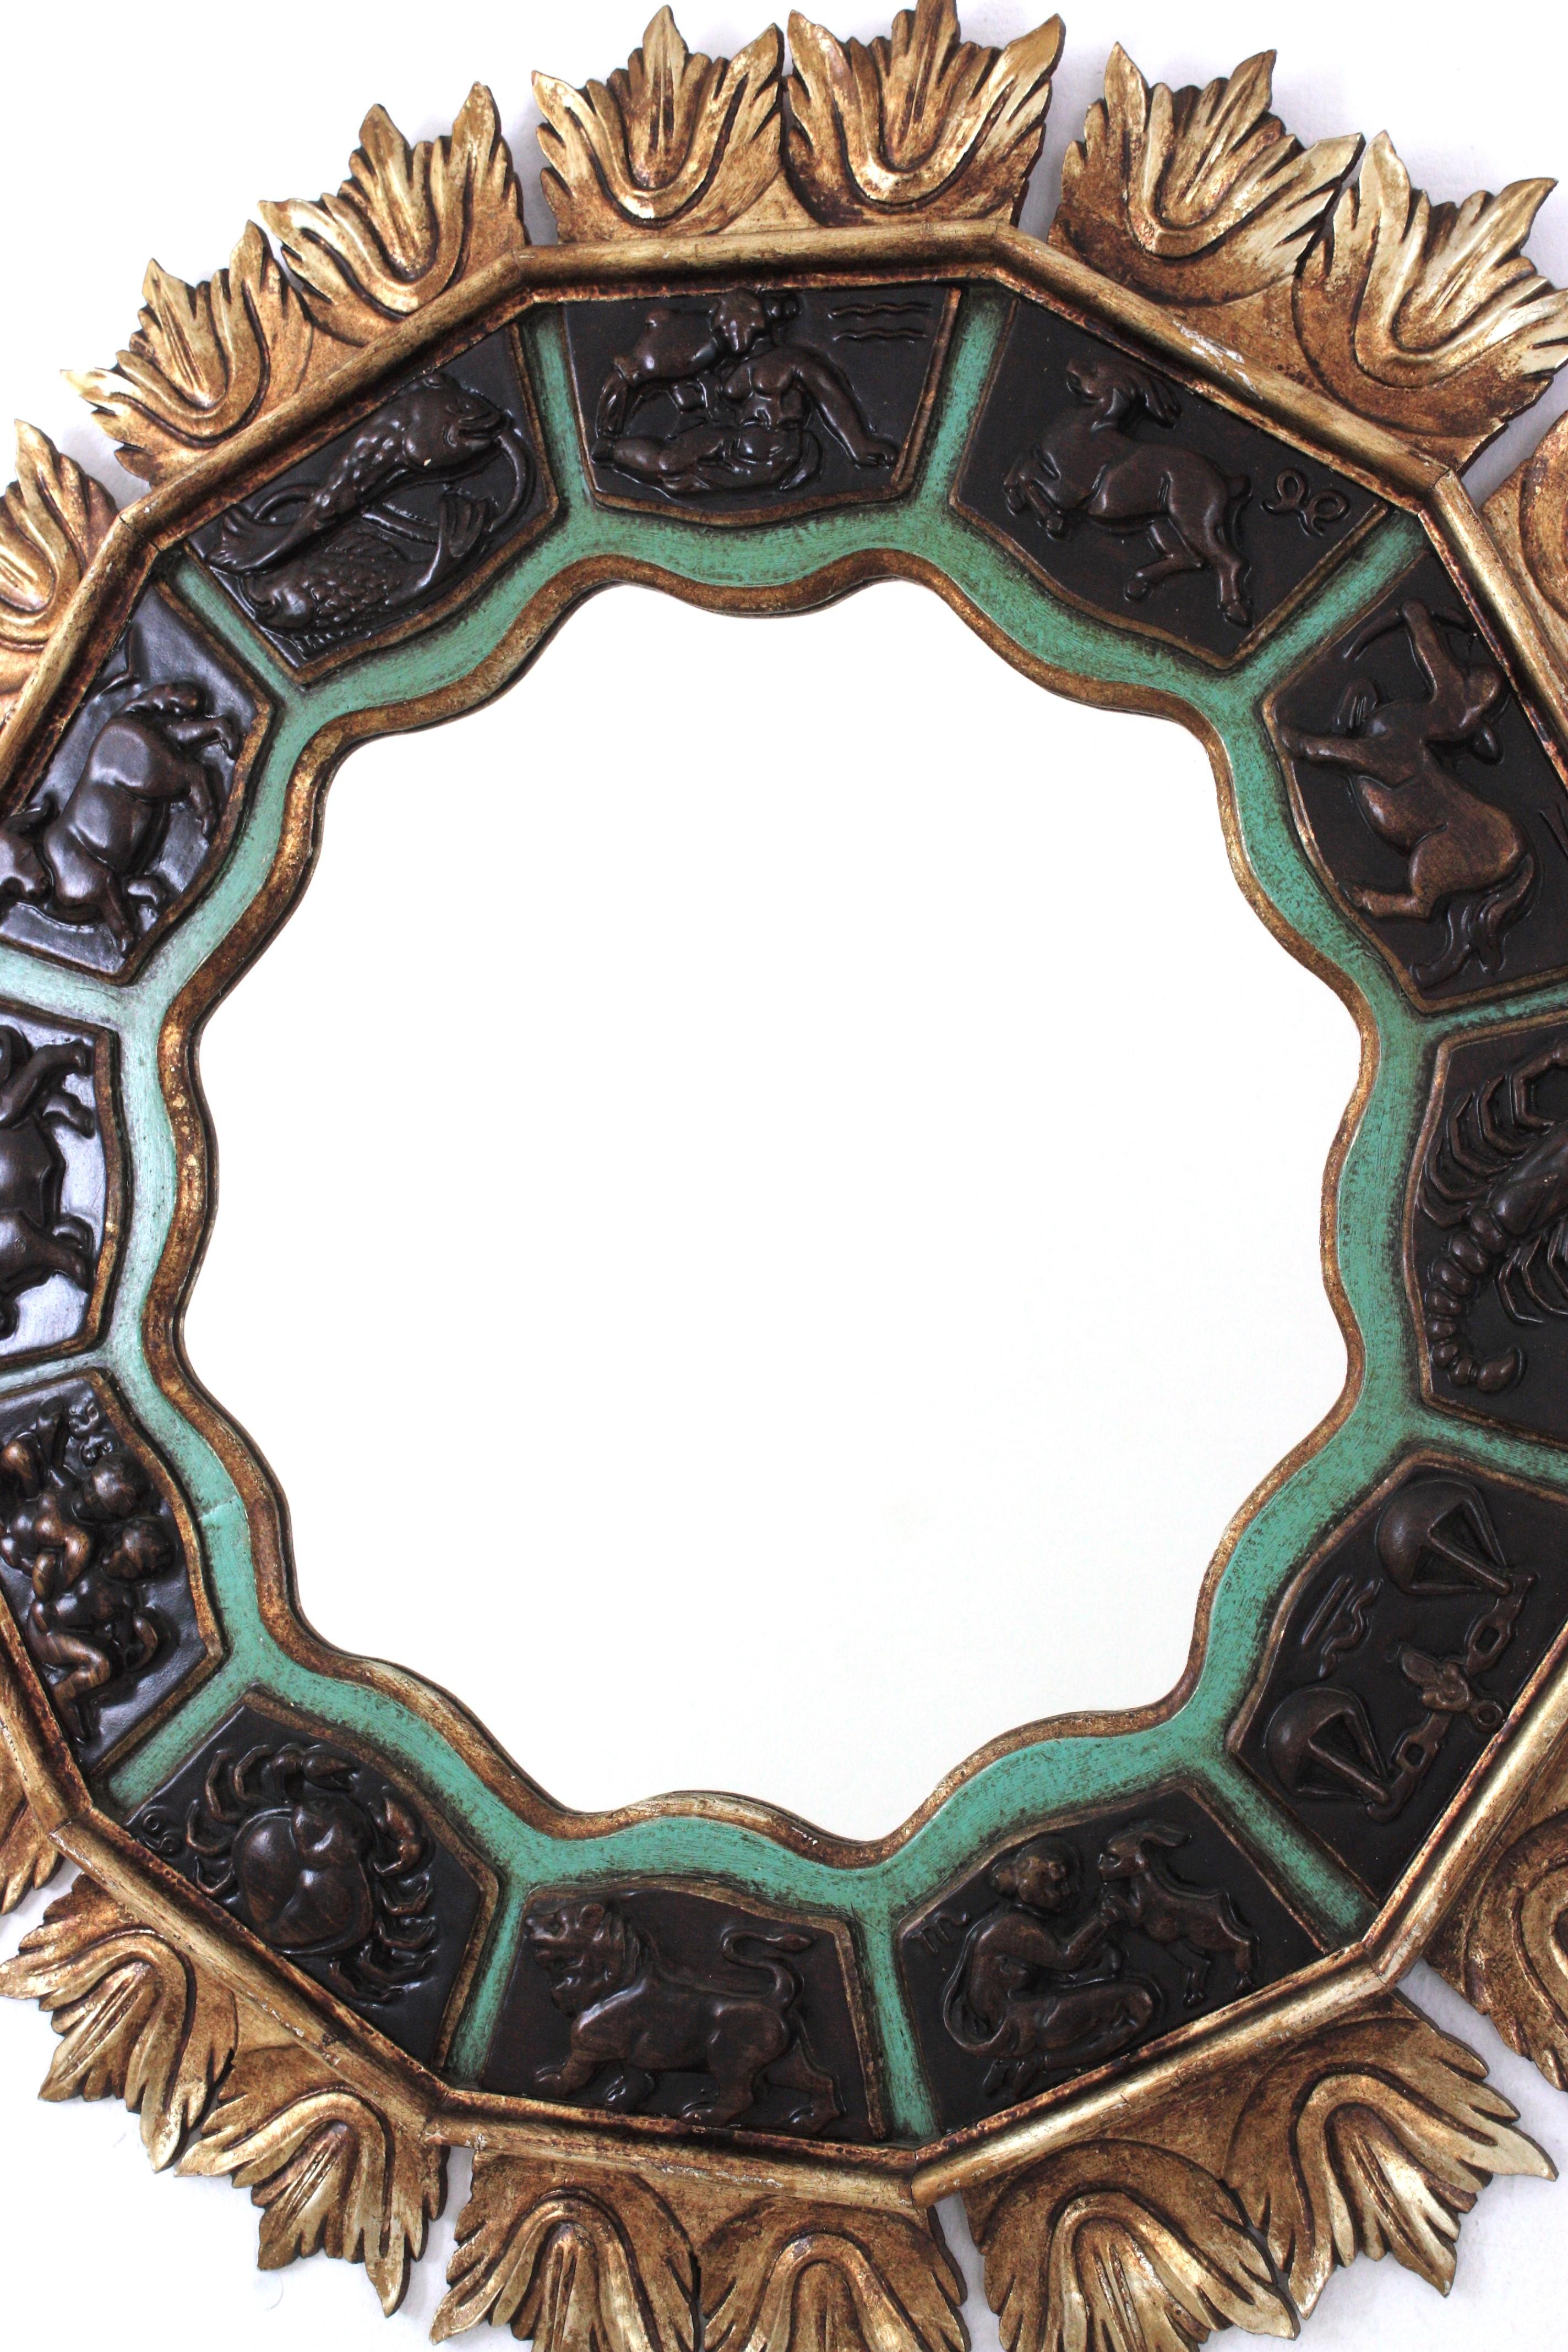 Sunburst Zodiac Mirror with Carved Giltwood & Green Frame, 1950s For Sale 4